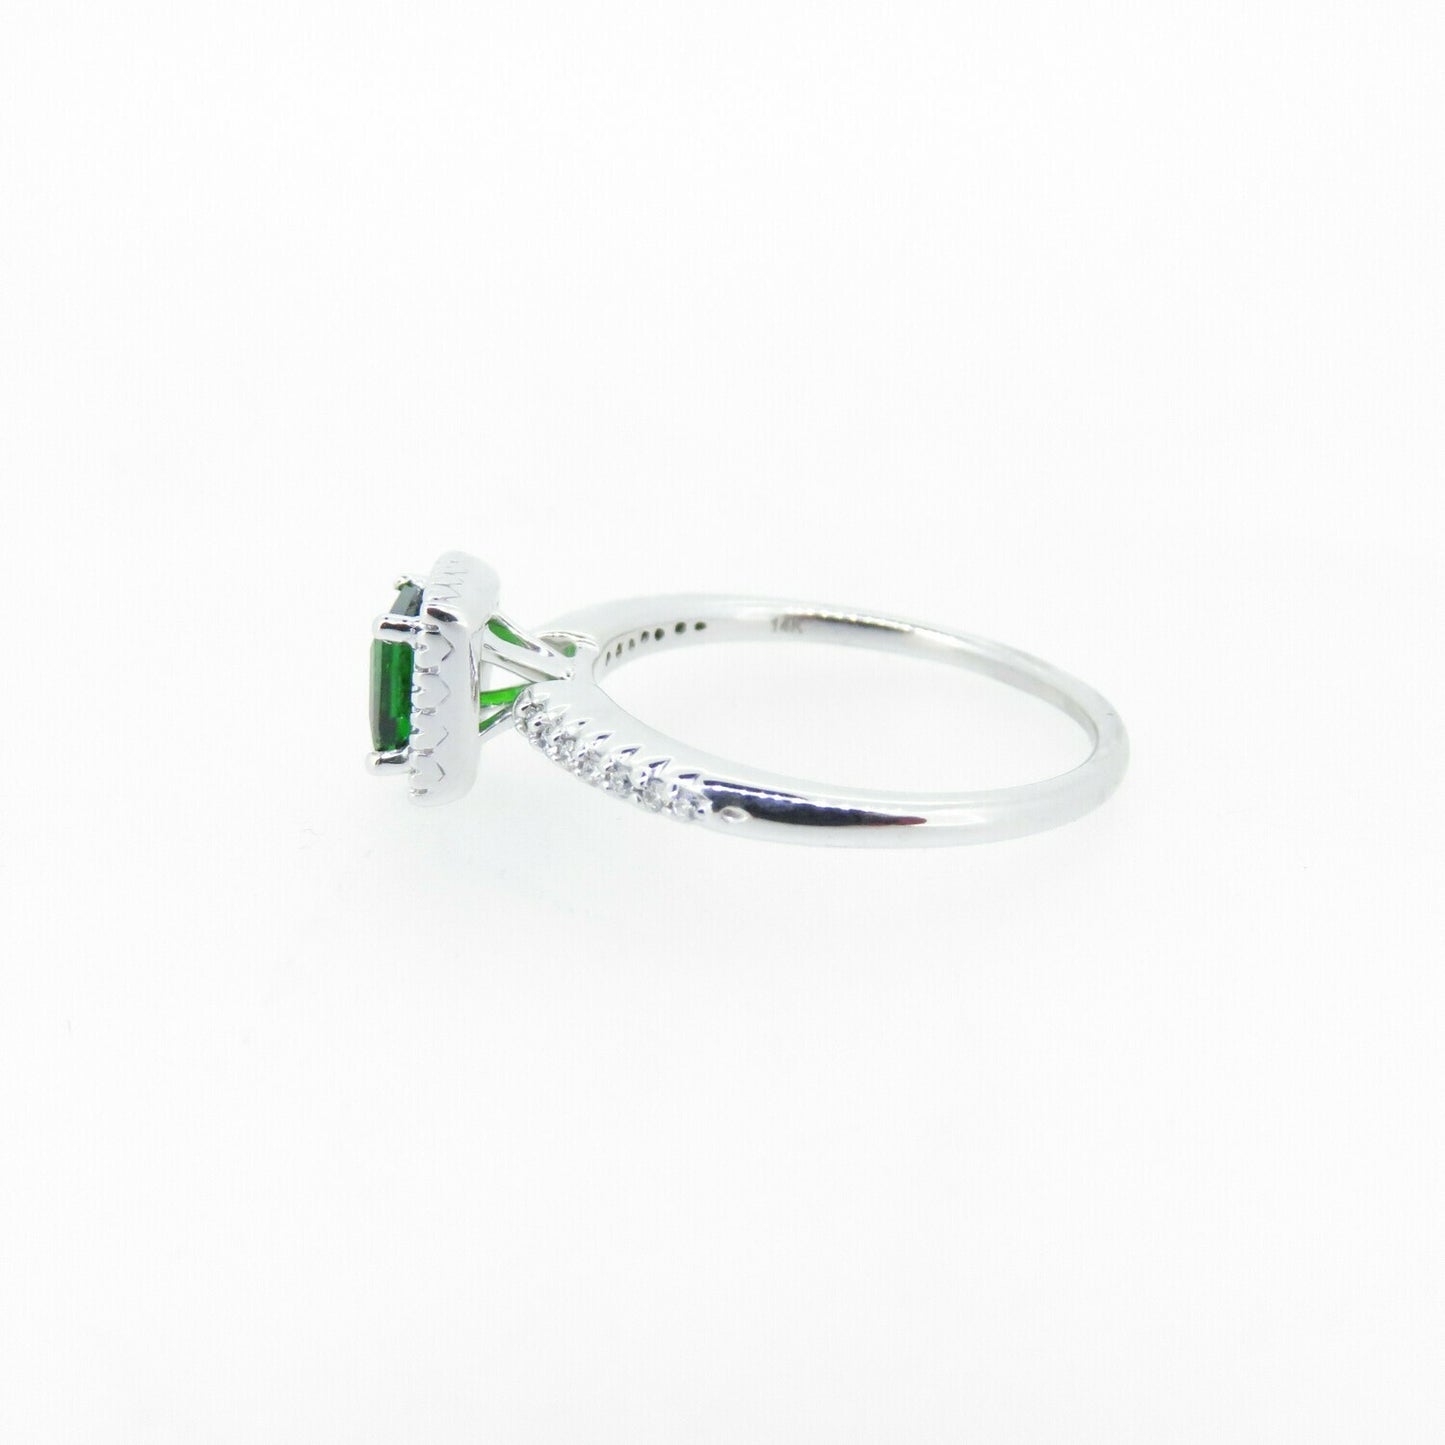 Chrome Diopside and Diamond Ring